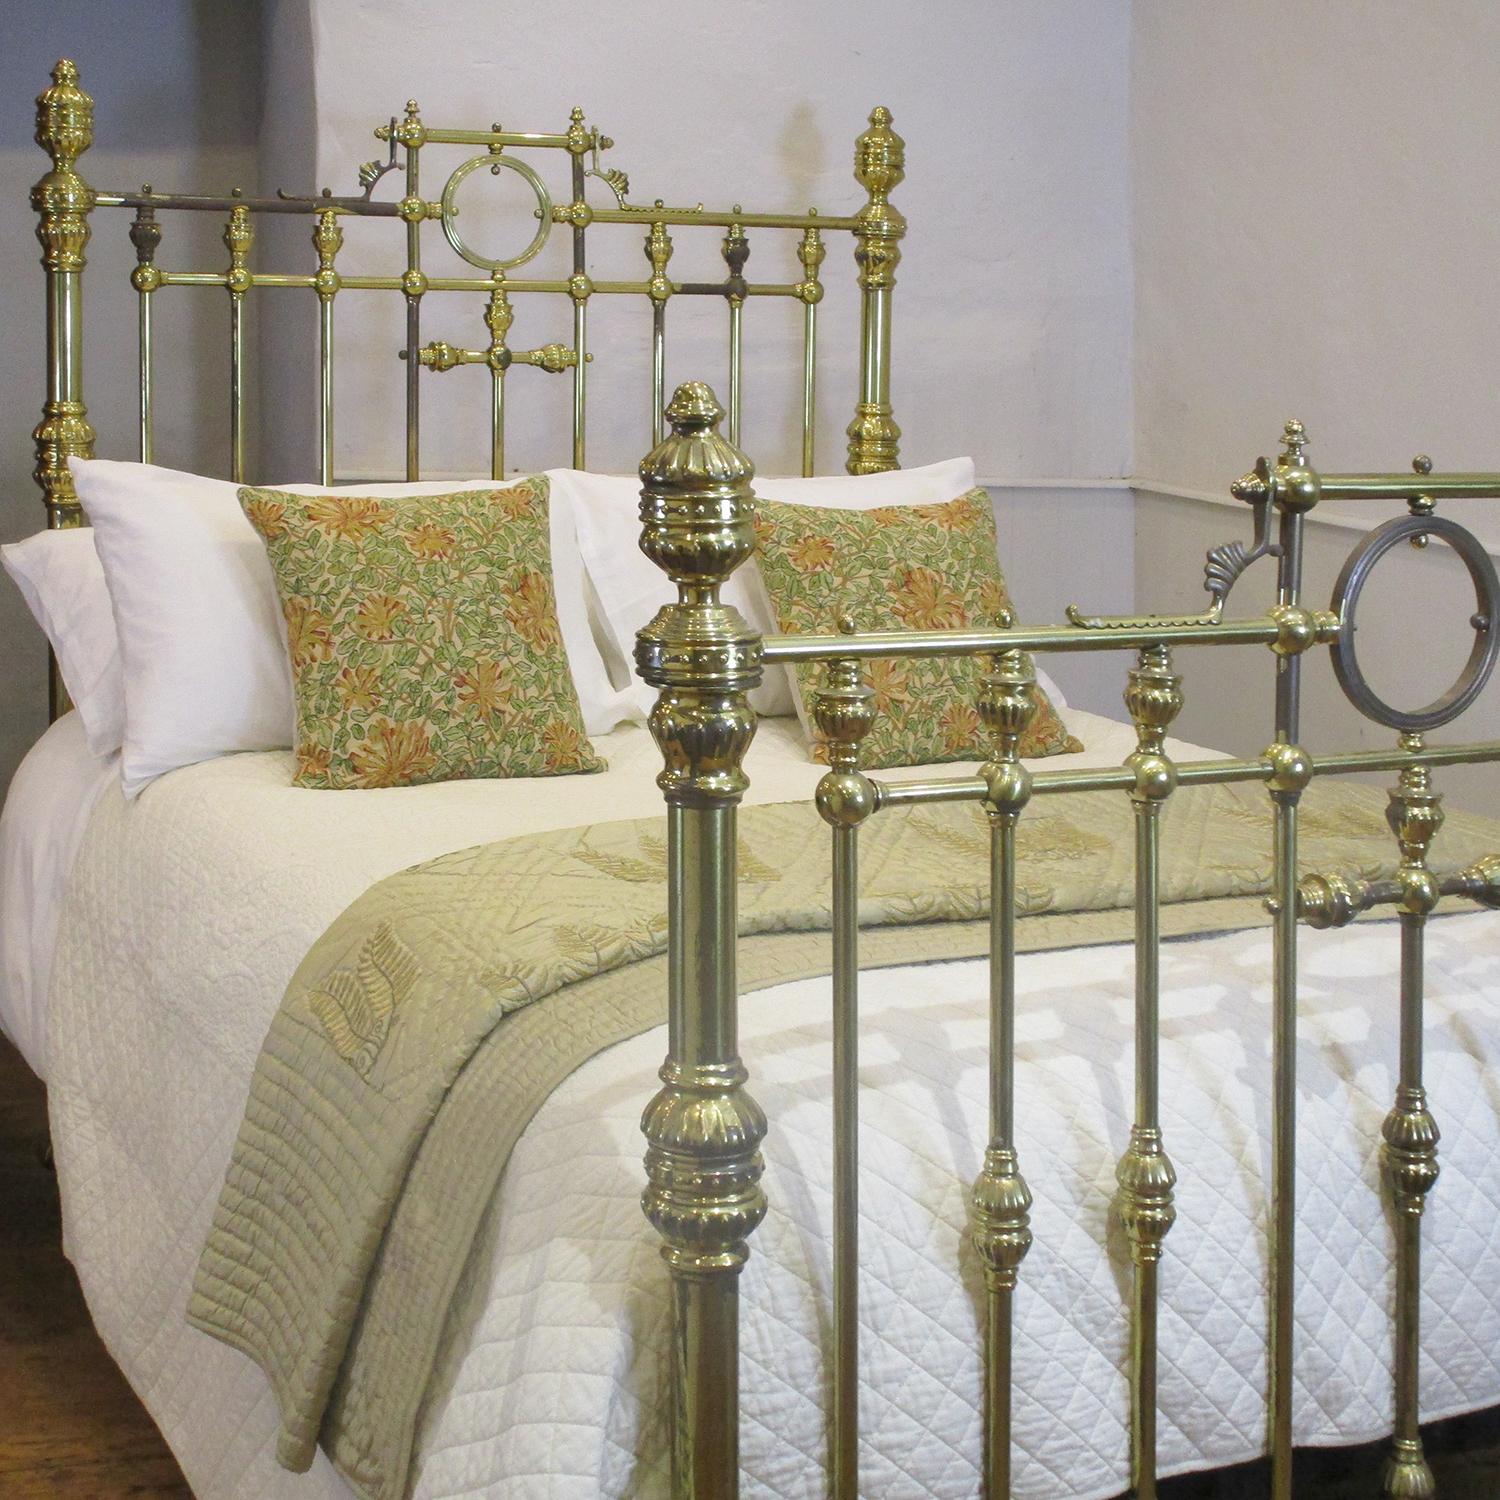 A superb top quality all brass Victorian antique bed with decorative brass fittings, and gallery feature with central ring.

This bed will accept a Double Size 54 inch wide base and mattress set.
We can also extend the bed out to US Queen size and